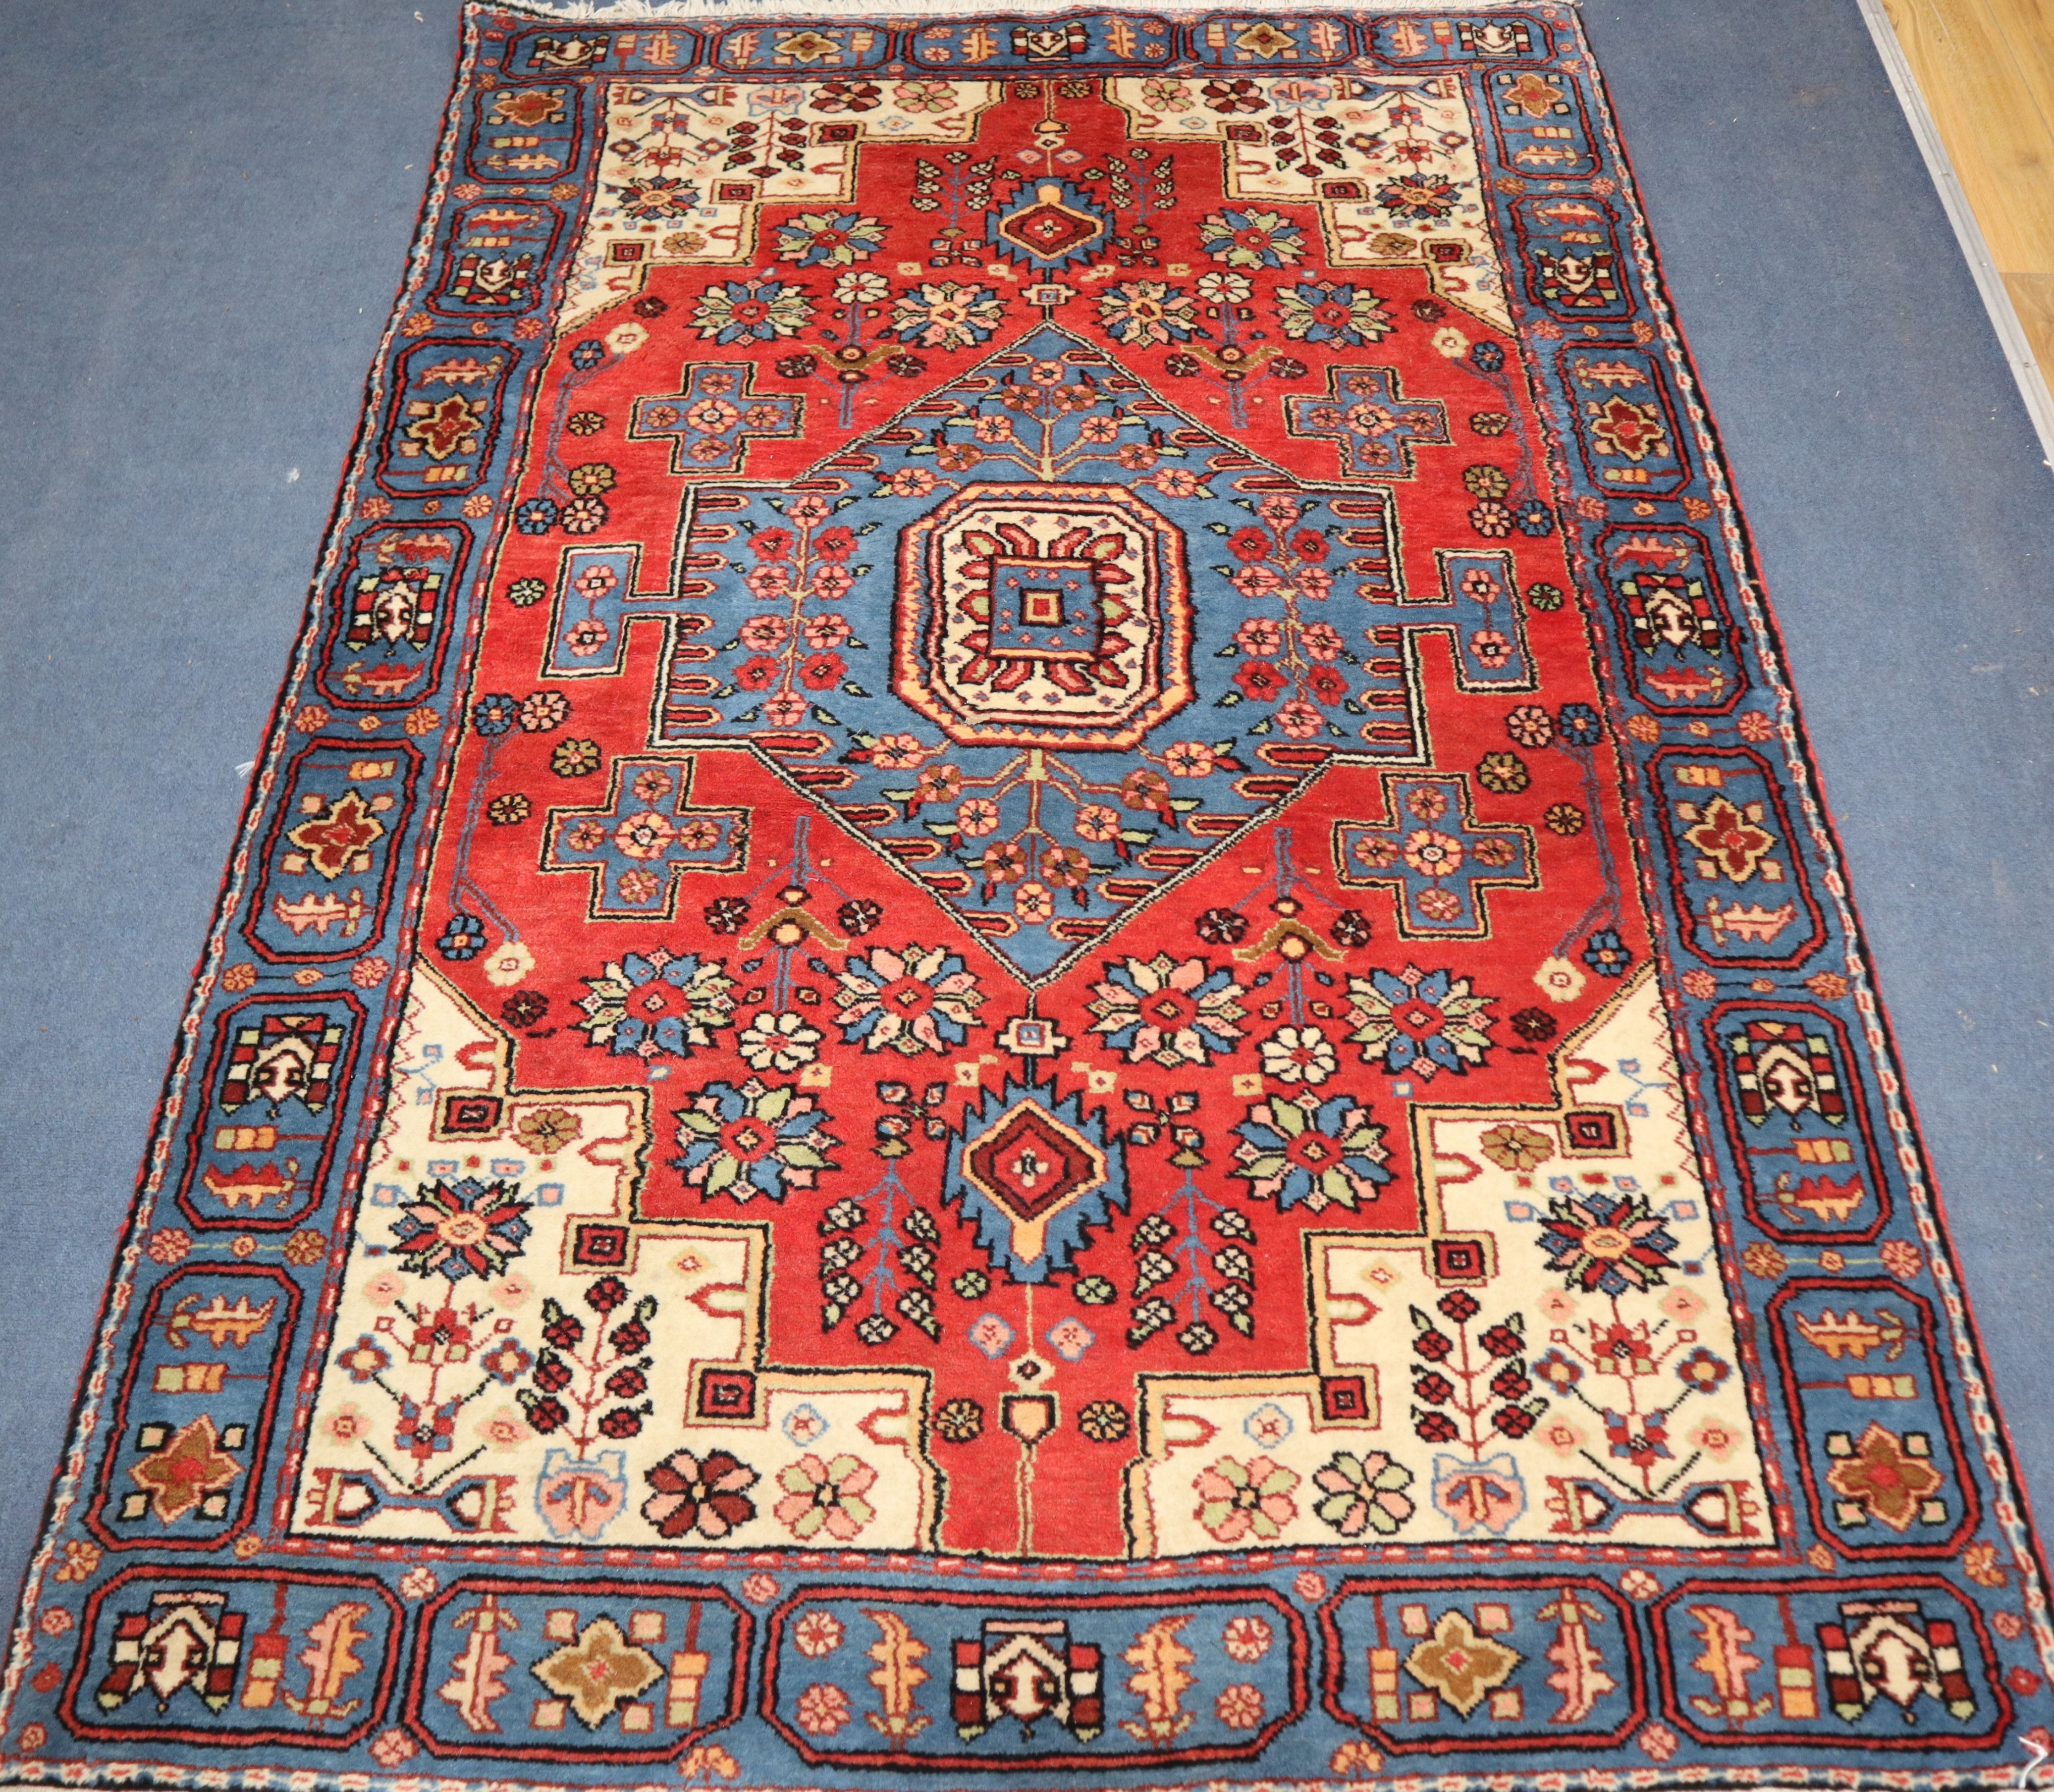 A Persian red ground rug 207 x 134cm